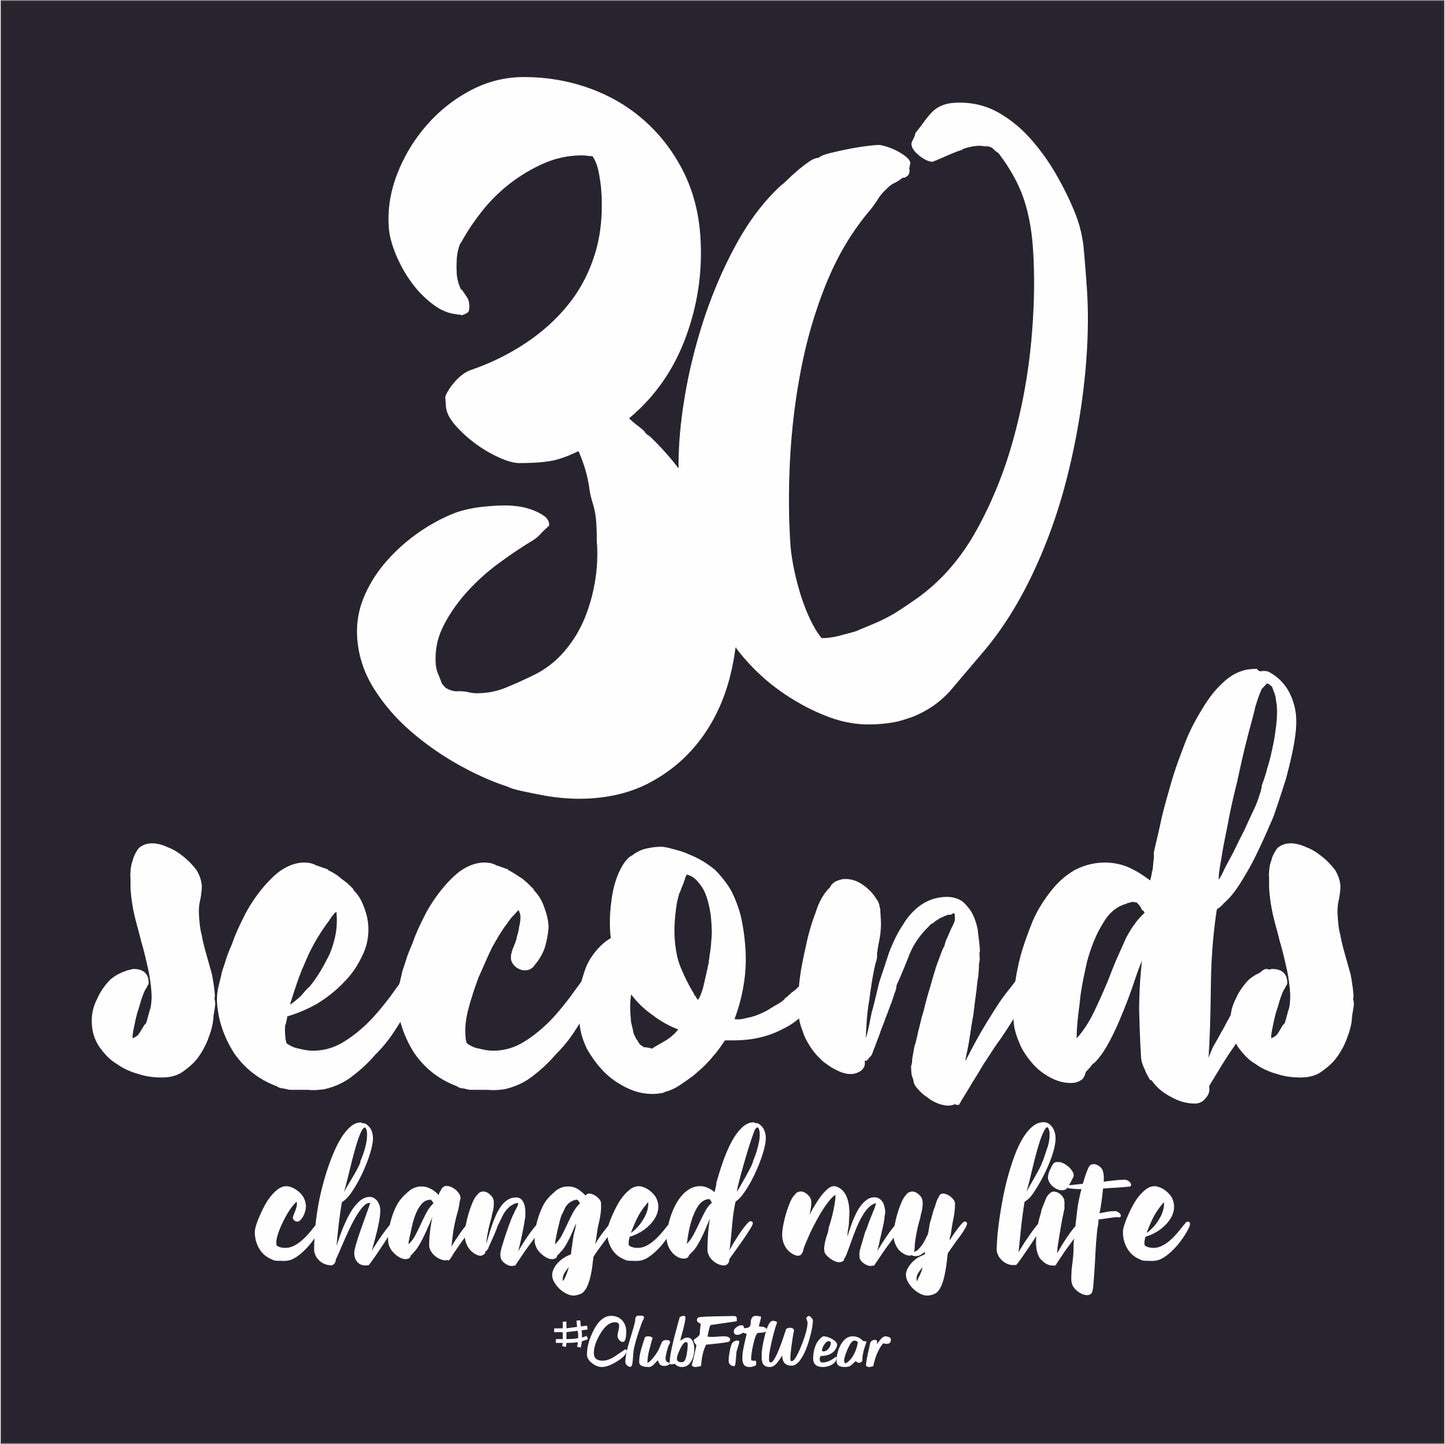 30 seconds changed my life